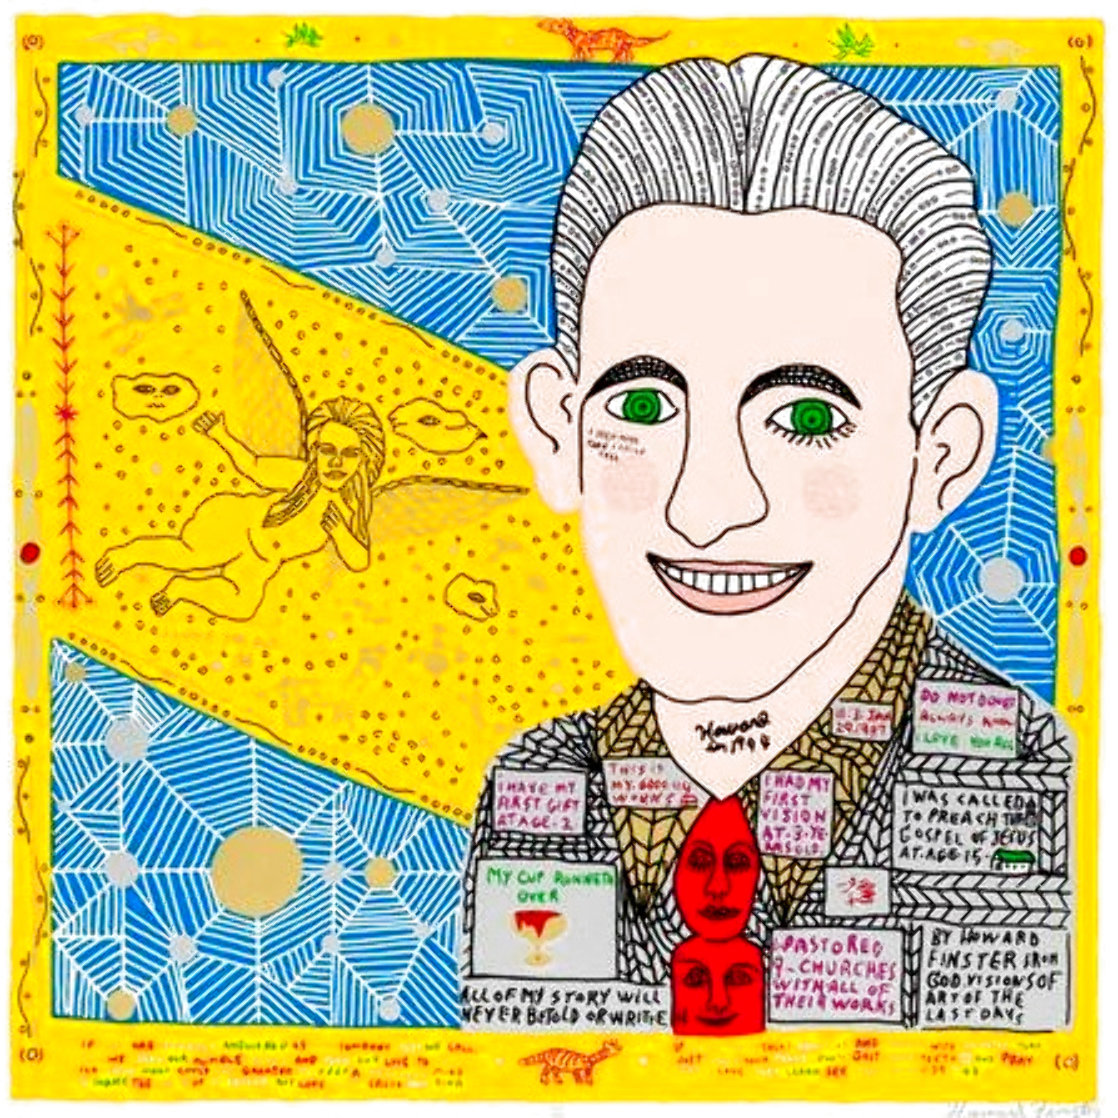 1944 - Self Portrait Limited Edition Print by Howard Finster